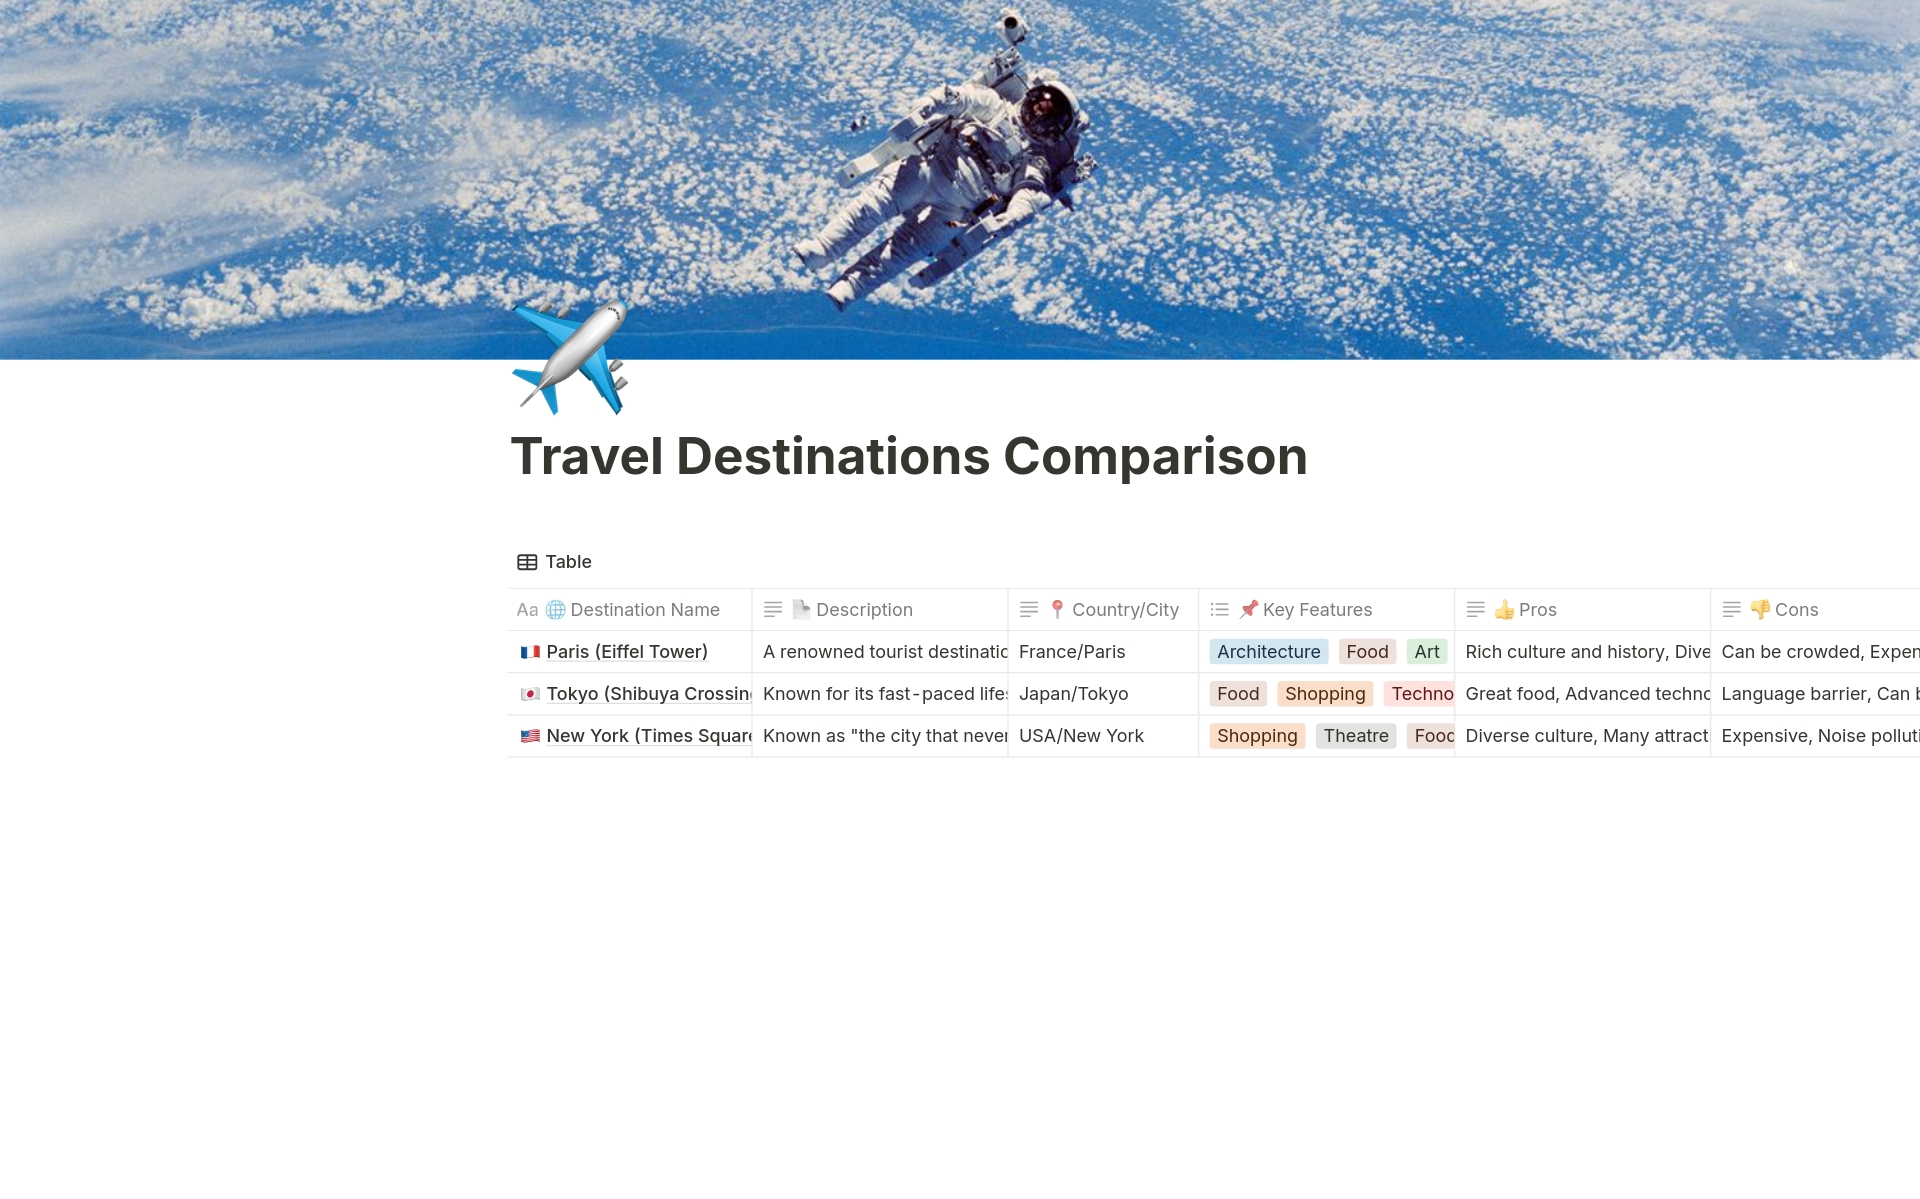 Organize and compare your travel plans effortlessly with our Notion Travel Destinations Comparison Template, featuring detailed sections for key attractions, pros and cons, best times to visit, and travel tips.